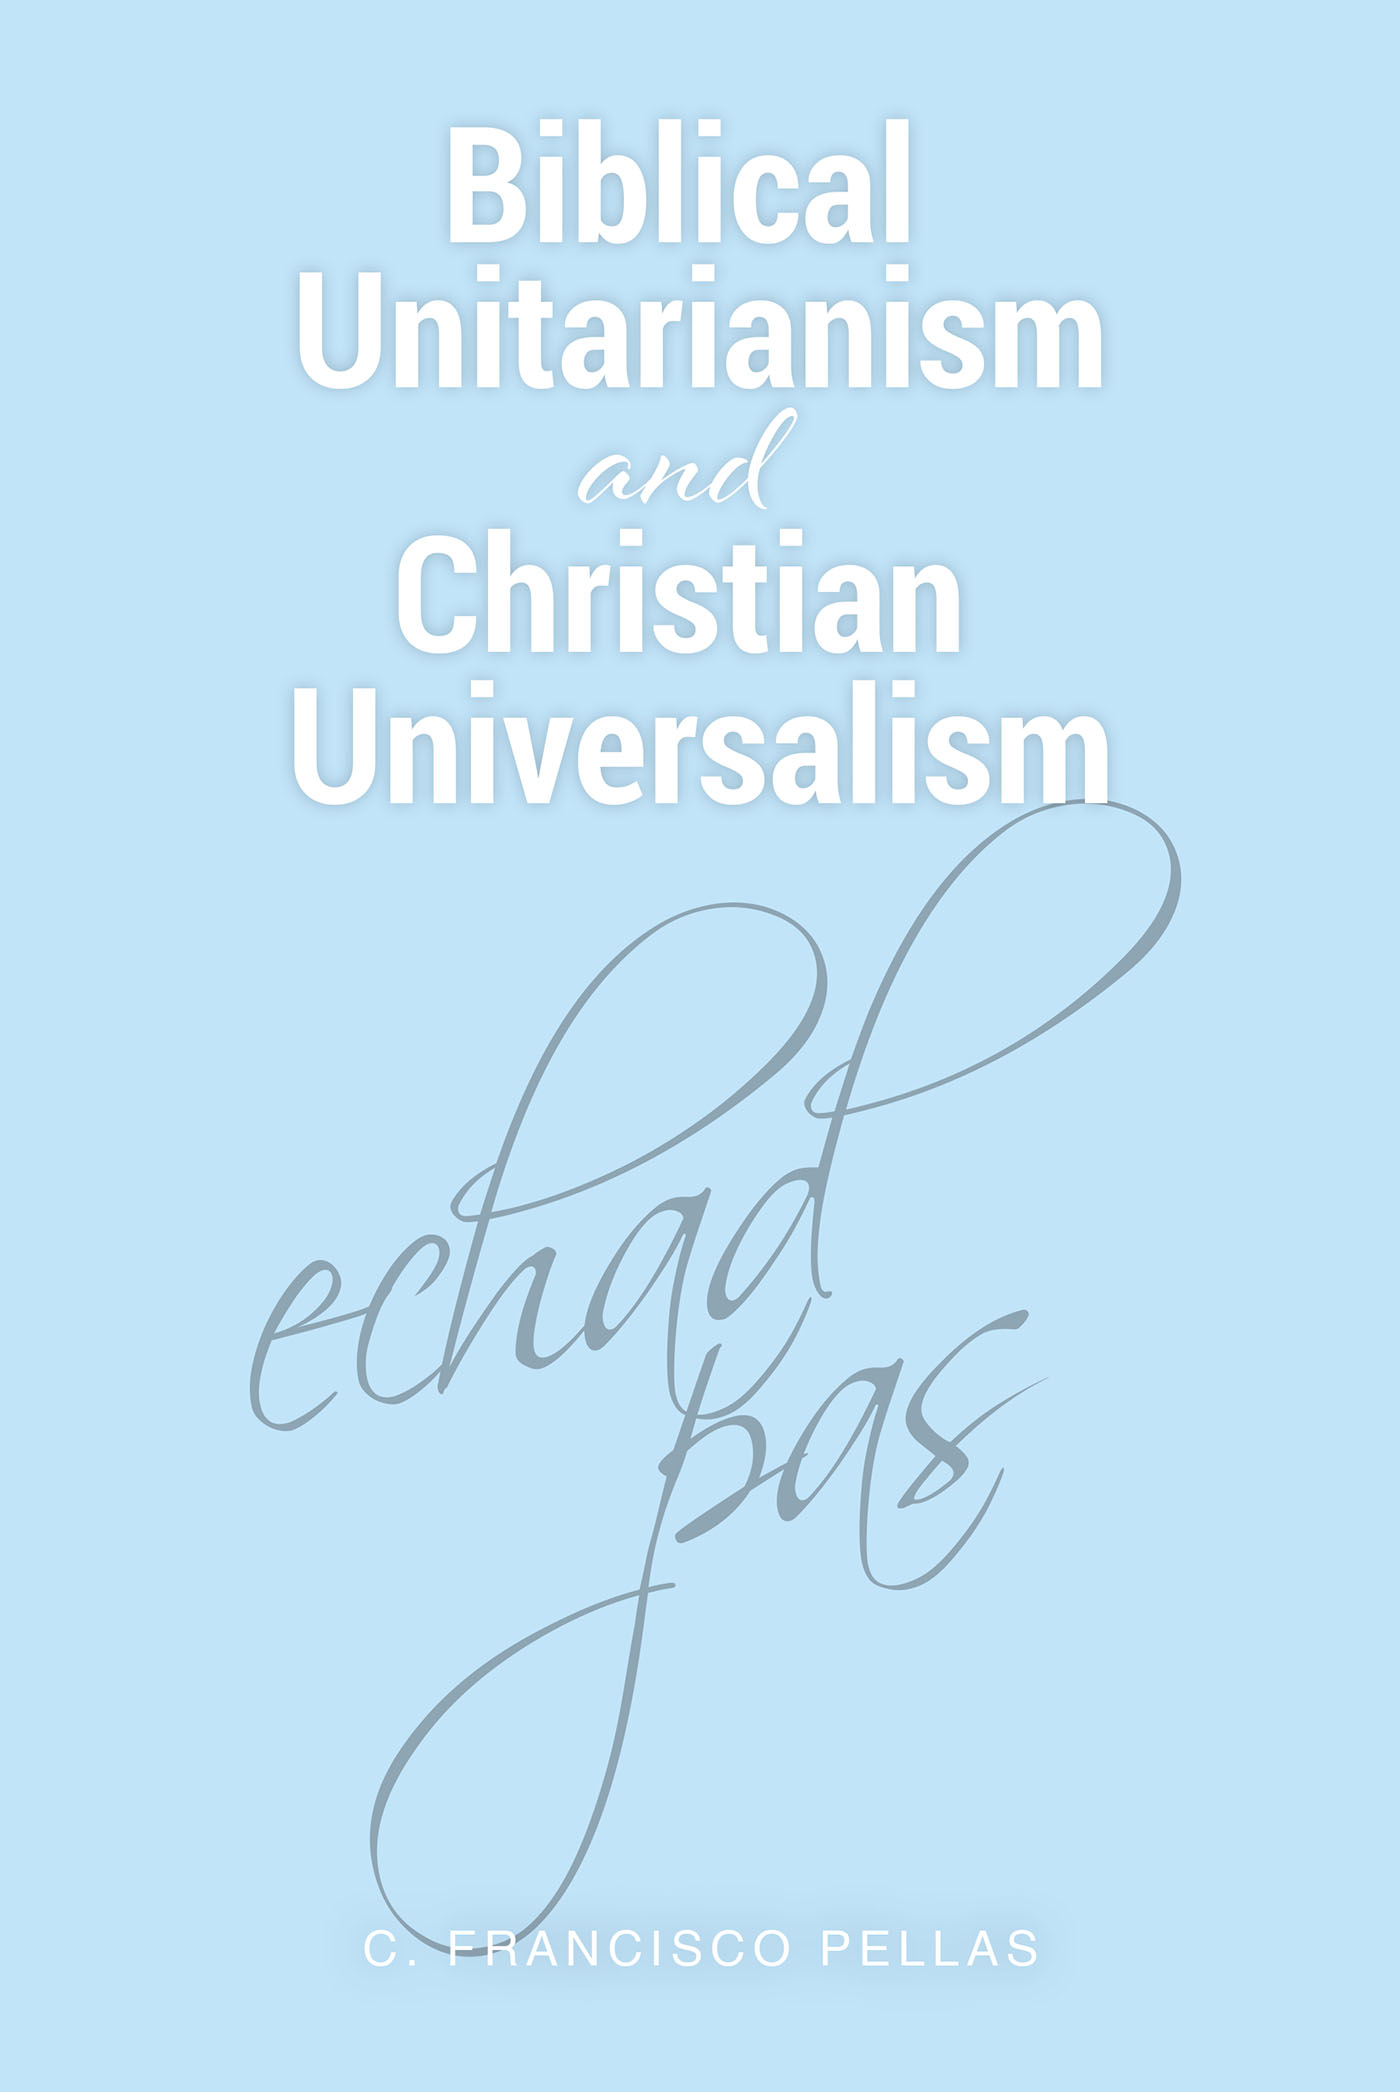 C. Francisco Pellas’s Newly Released “Biblical Unitarianism and Christian Universalism” is a Thought-Provoking Study of Key Scripture